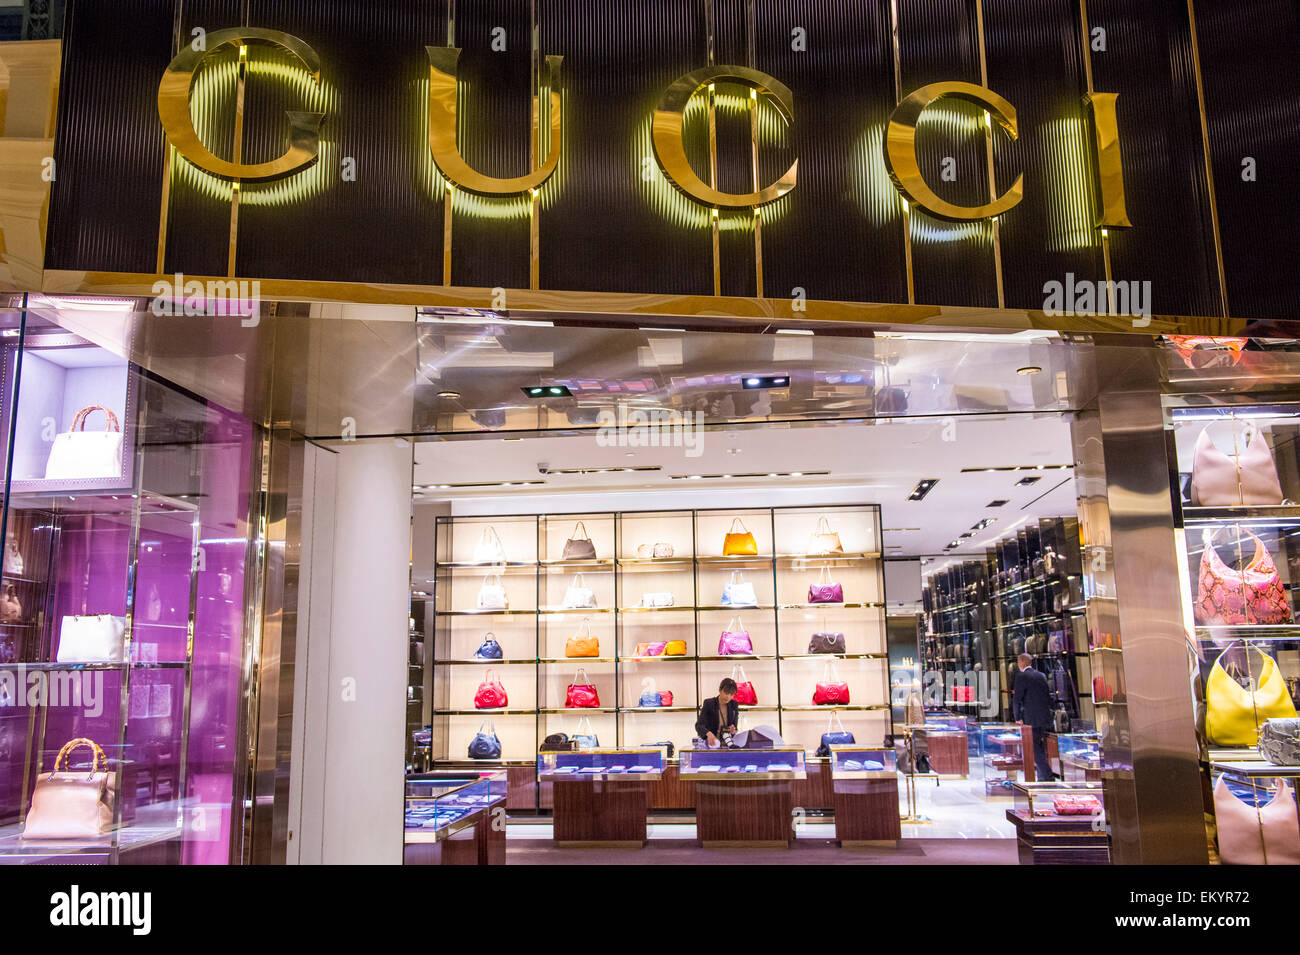 Exterior of the Gucci Boutique at Crystals retail complex on the